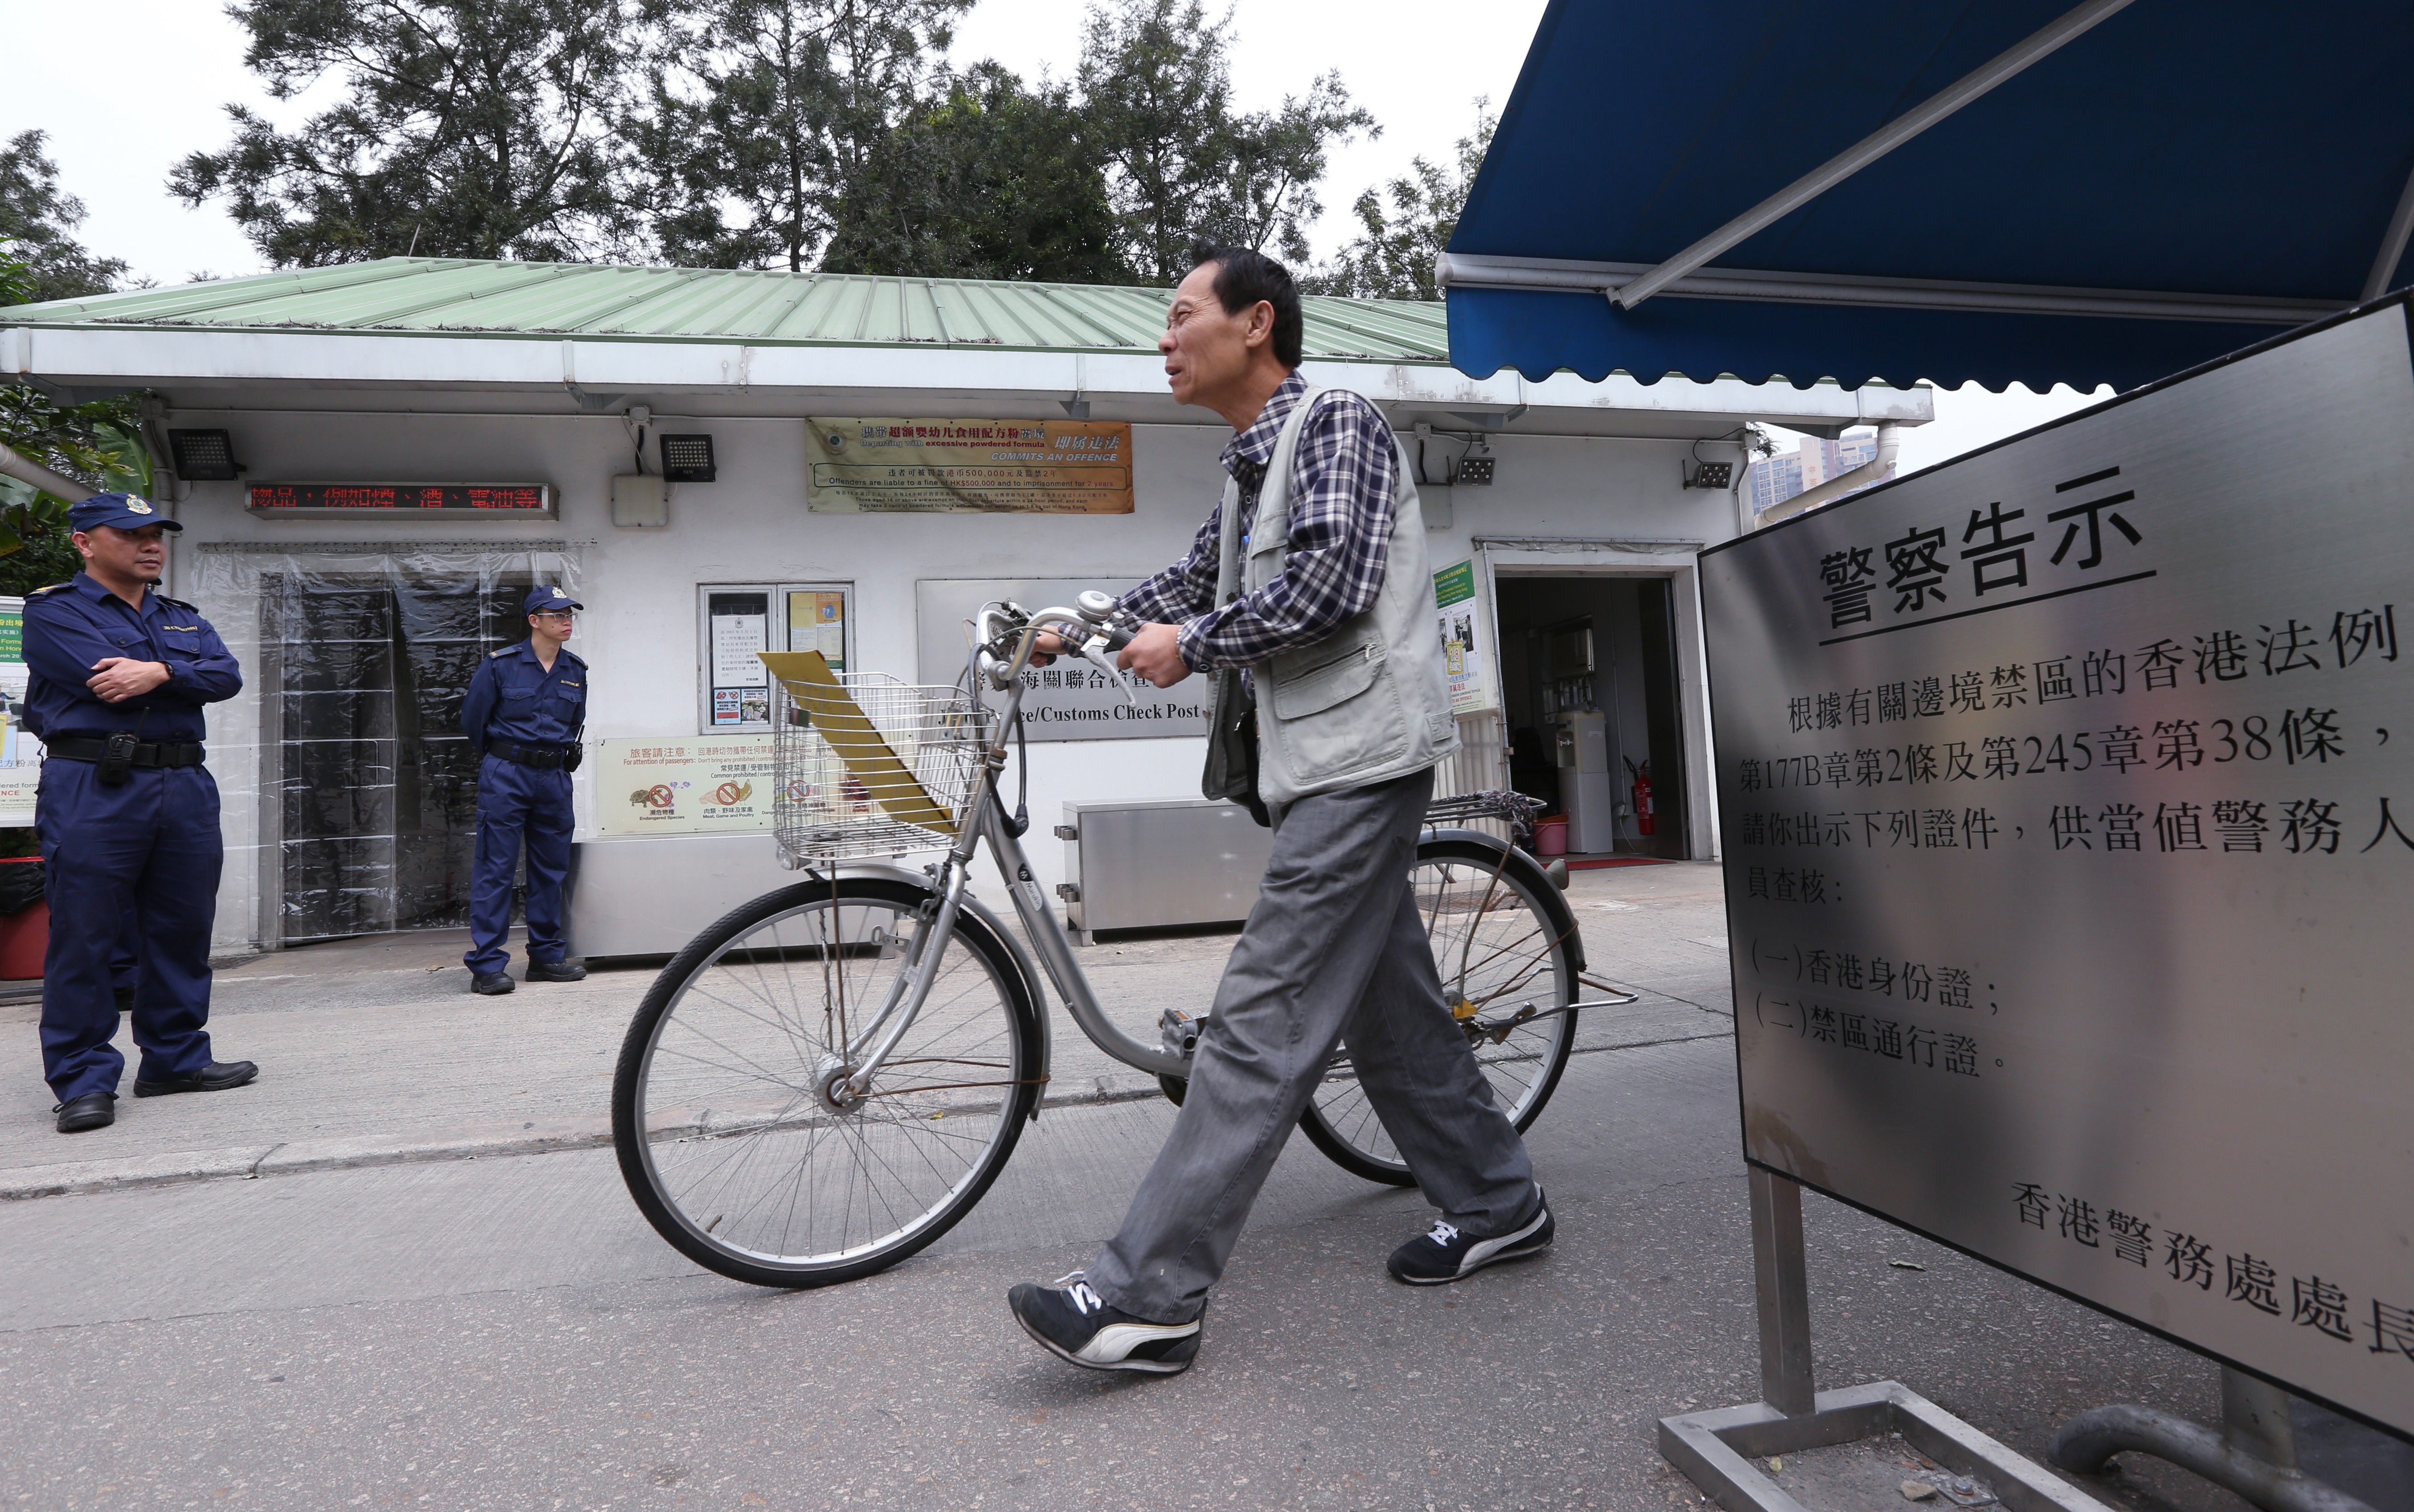 A resident uses the Chung Ying Street Police Post in Sha Tau Kok. Photo: SCMP Pictures